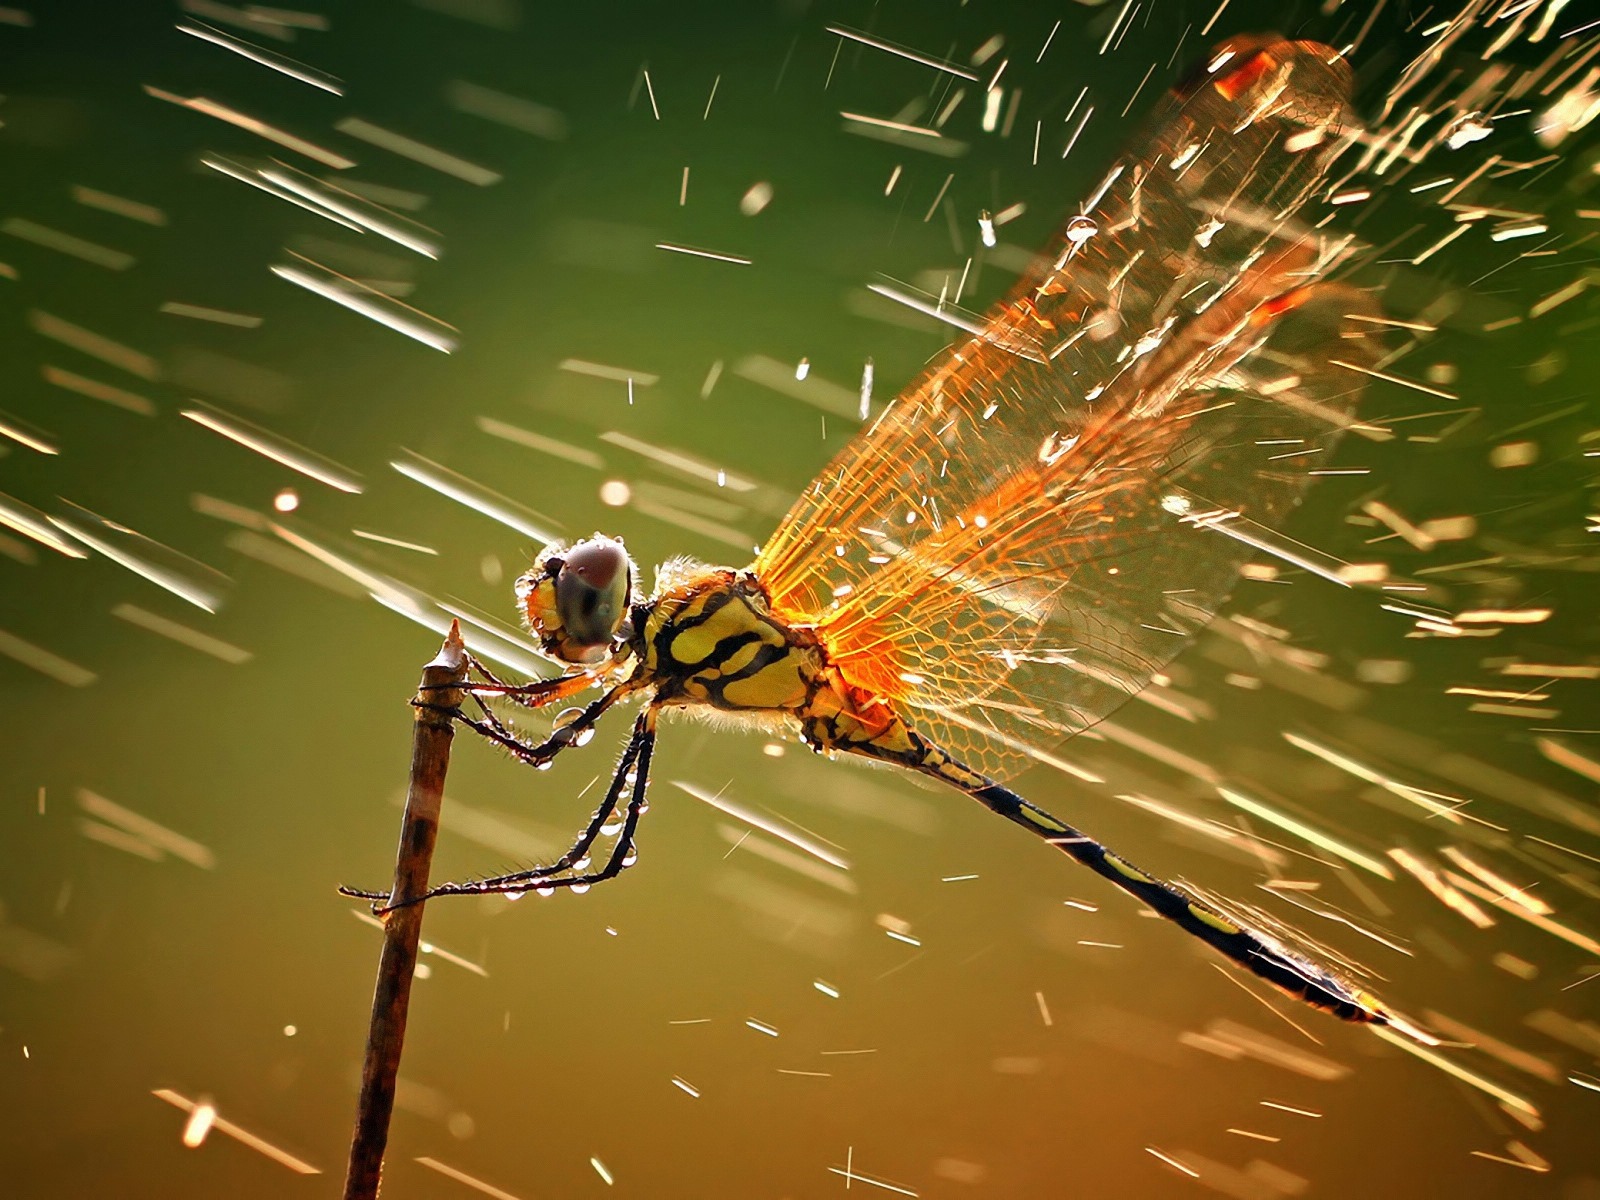 Insect close-up, dragonfly HD wallpapers #32 - 1600x1200